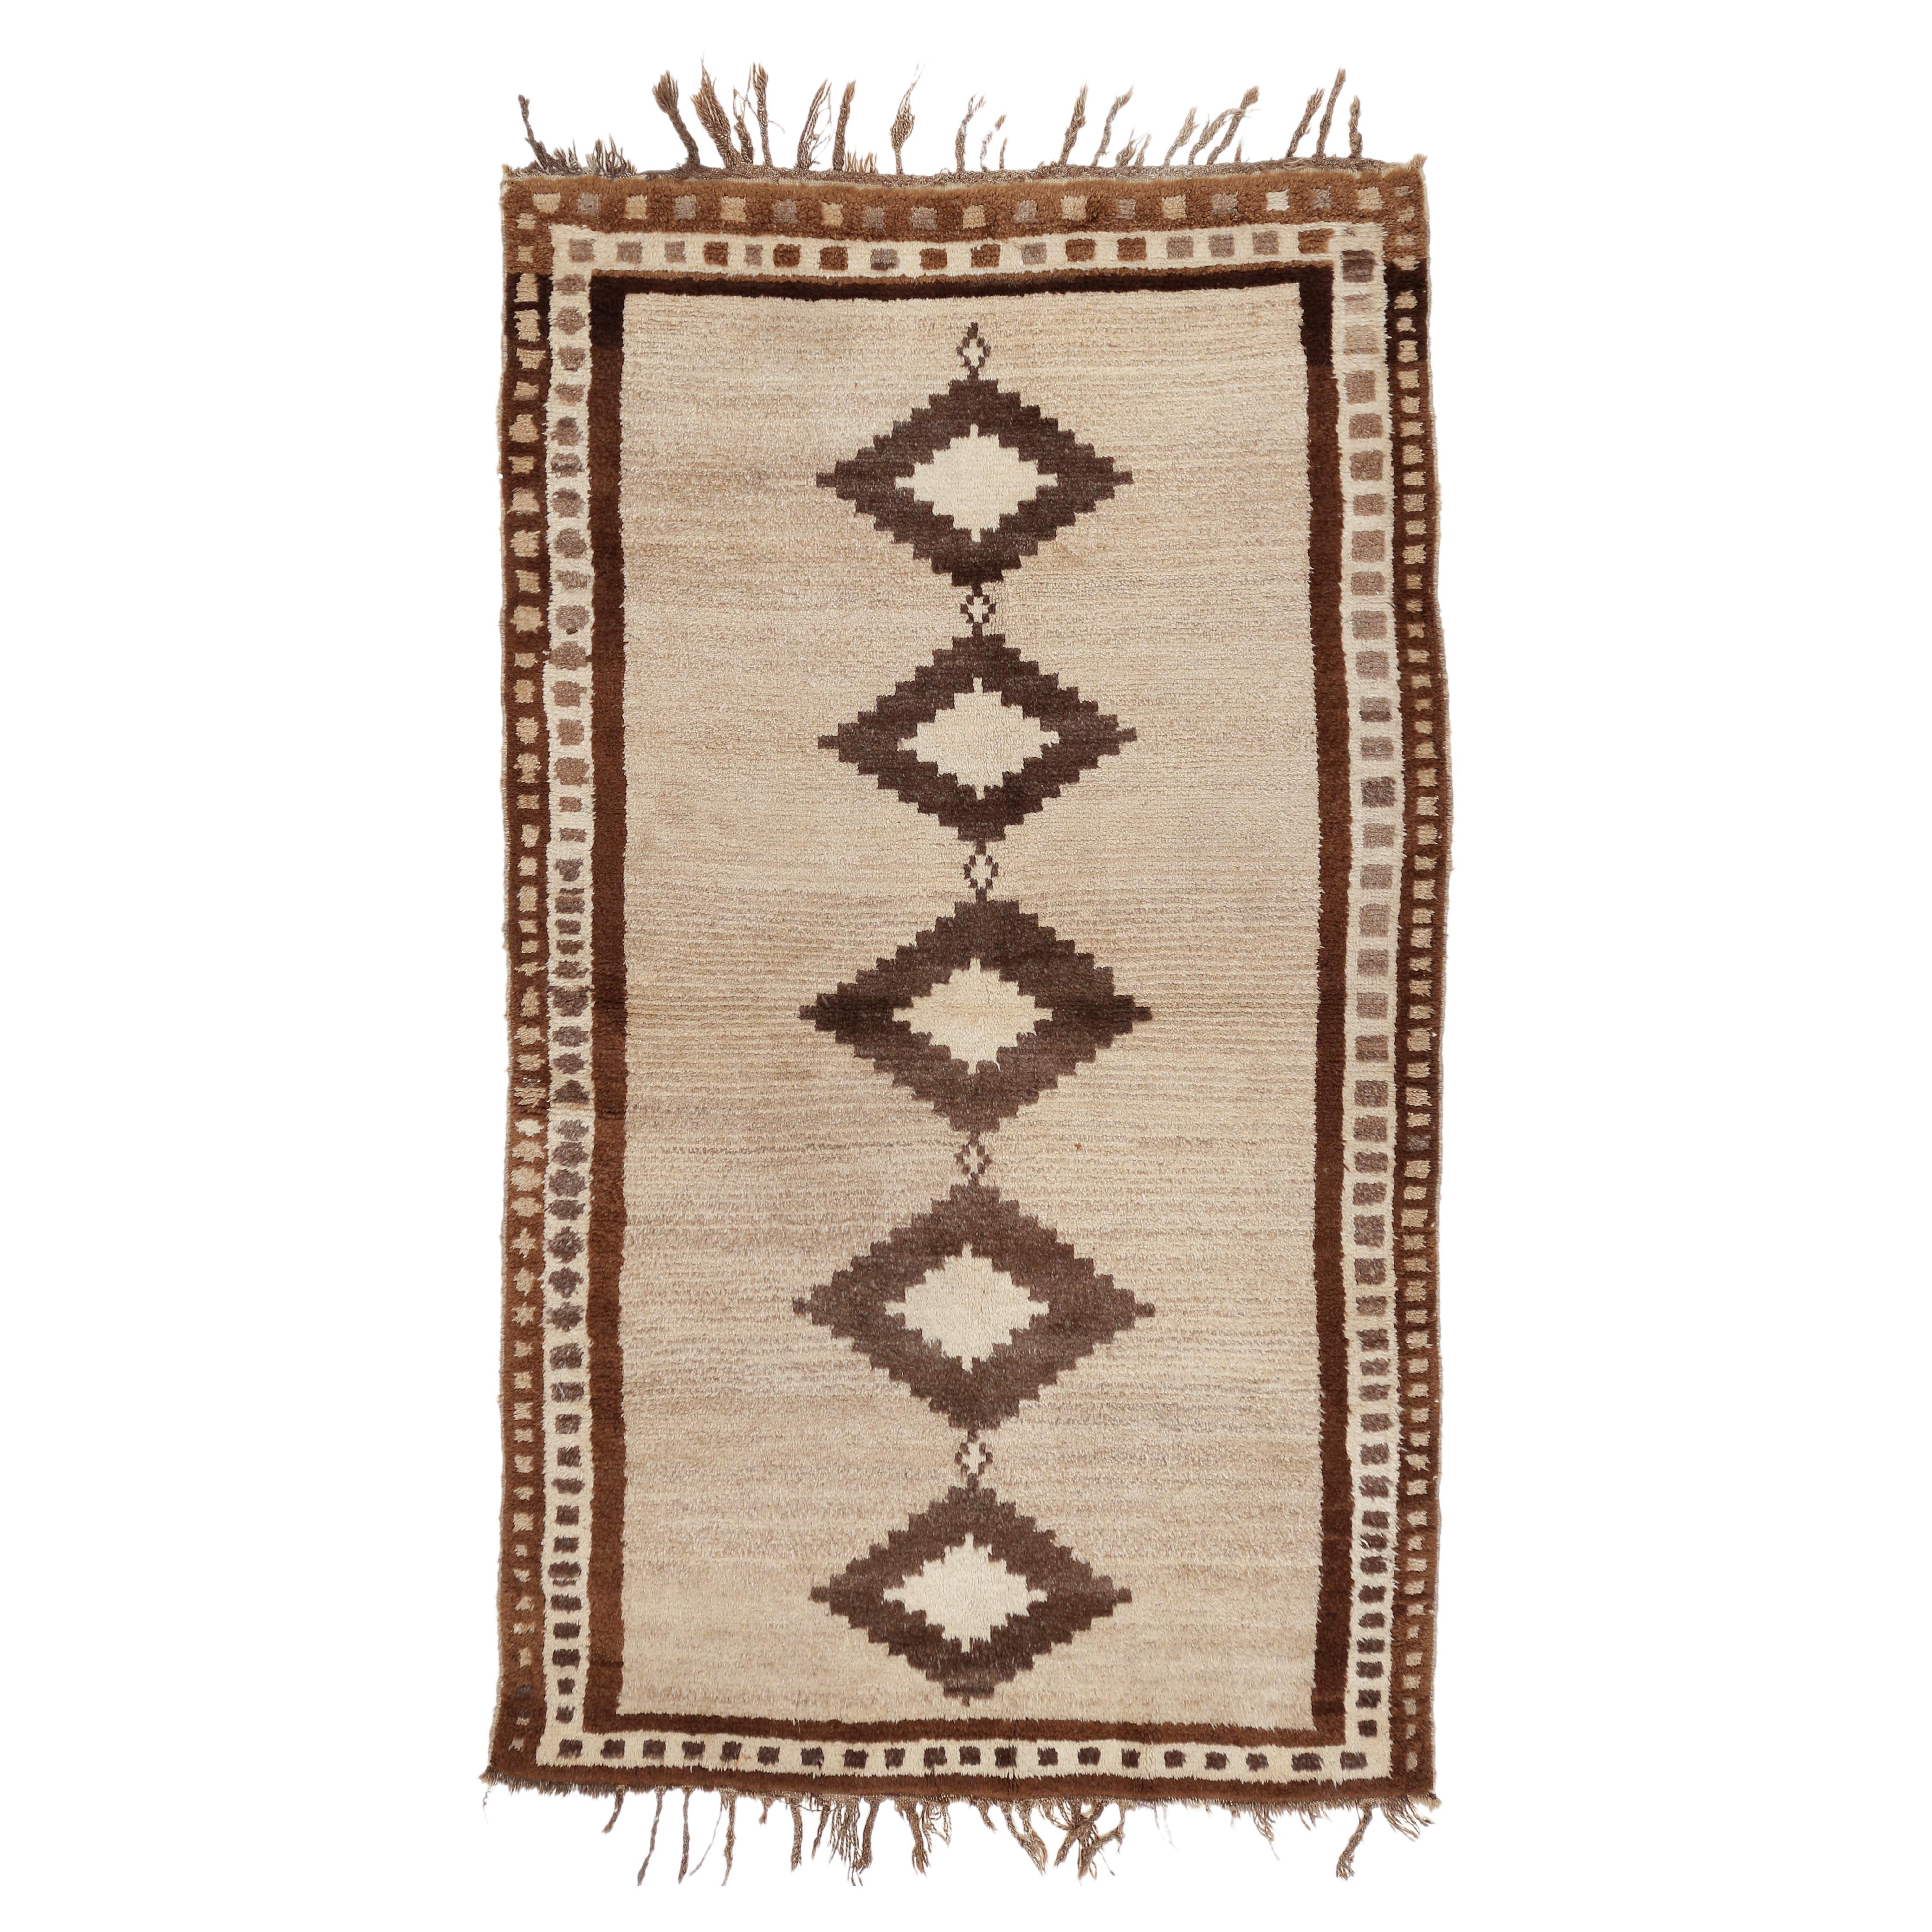 Antique Geometric Design Tribal Rug in Camel Hair and Mocha Neutral Colours For Sale